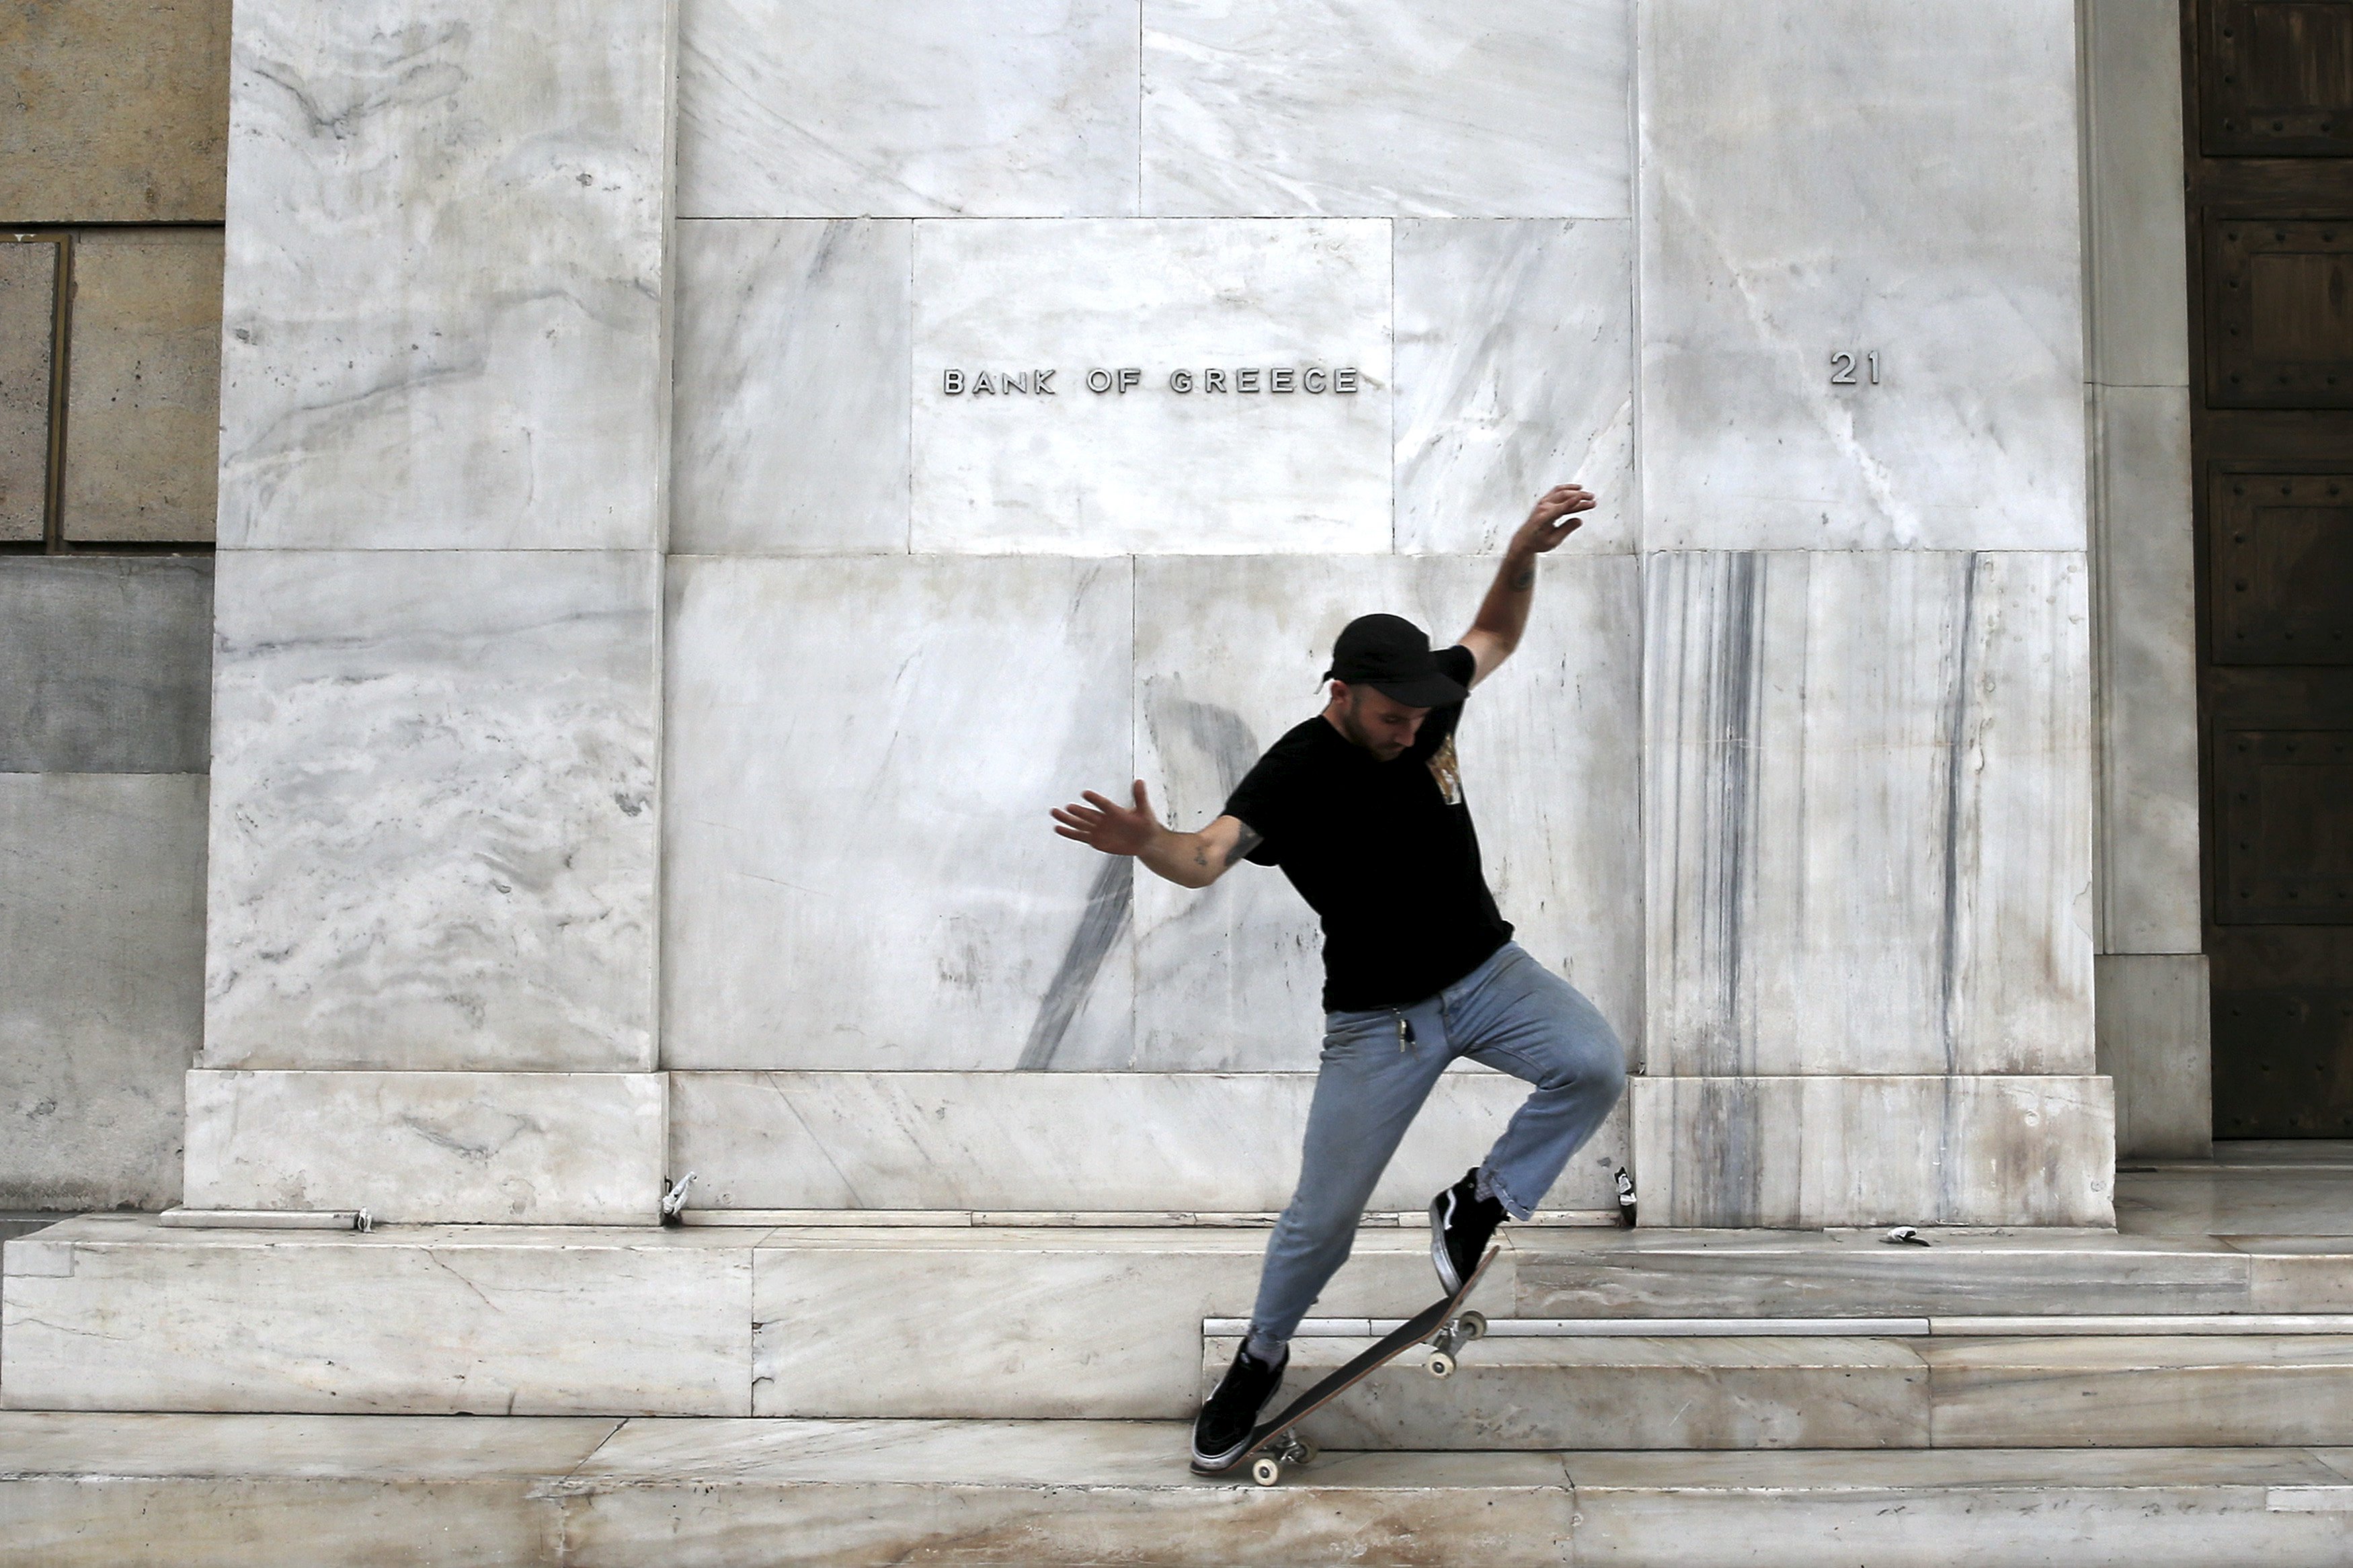 A man skateboards in front of the Bank of Greece building in Athens as talks bogged down between the government and its international creditors. The country's banks are on the verge of shutting down. Photo:  Reuters